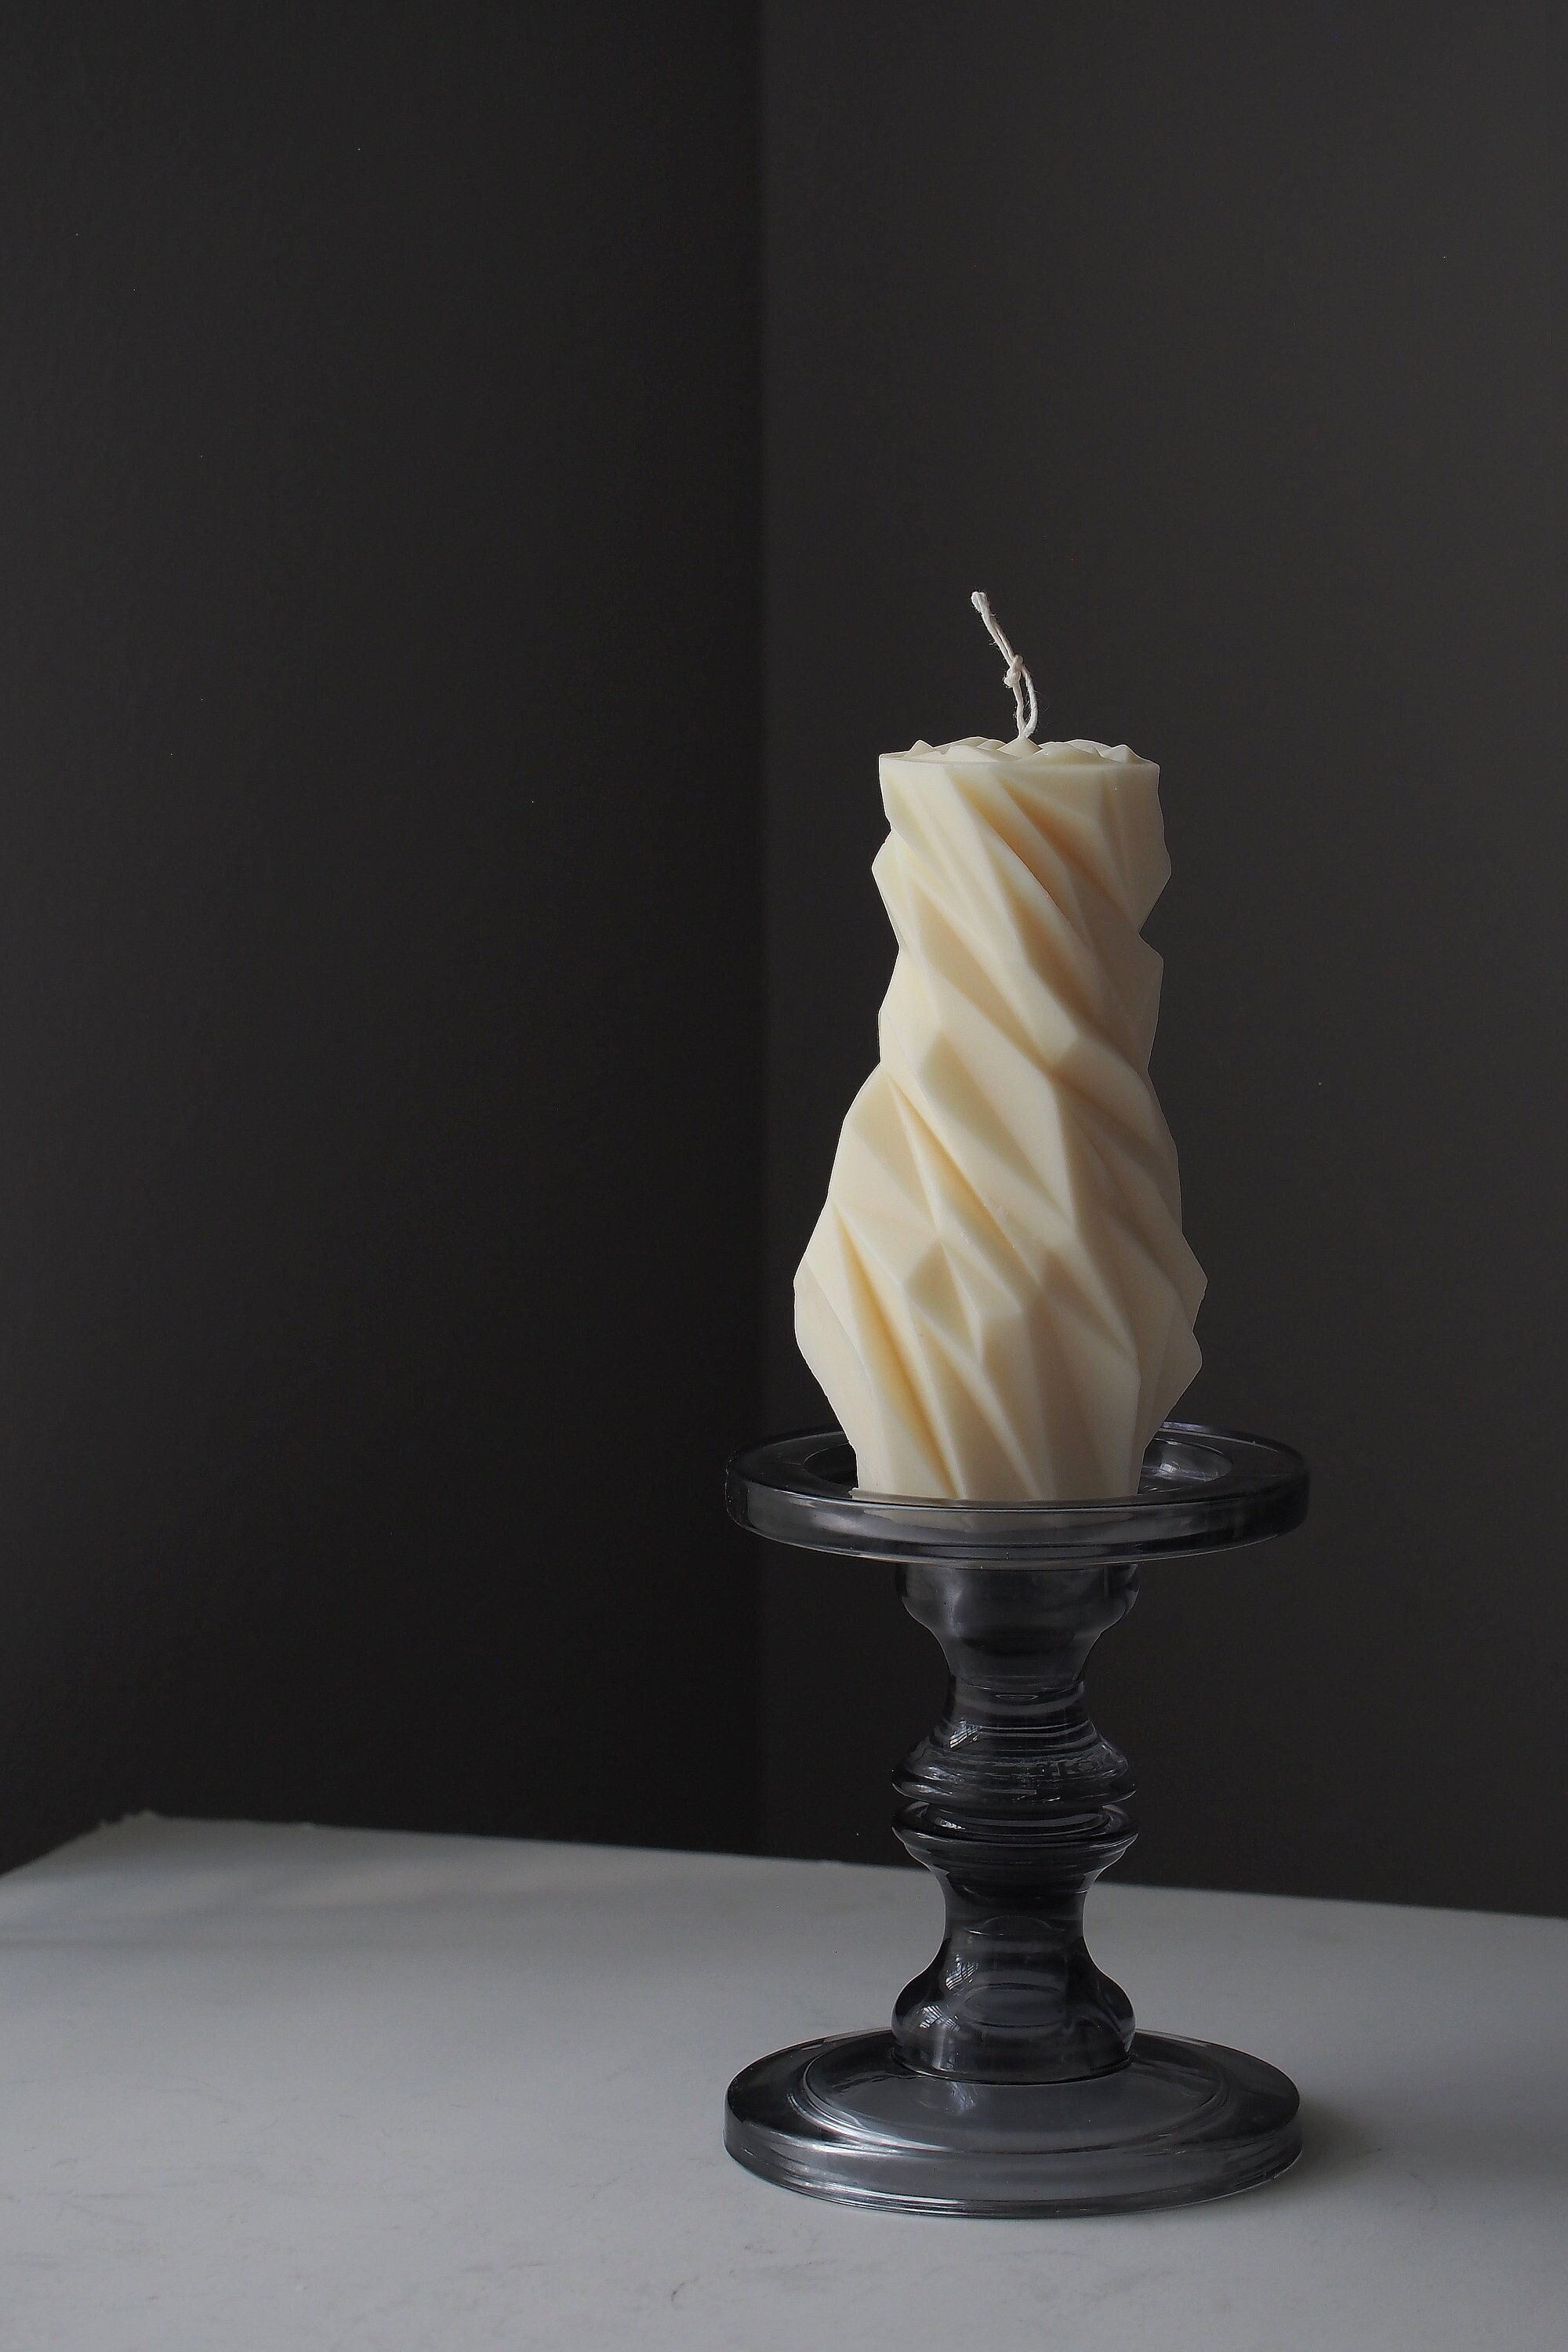 Ellie Twisted Taper Candle, Spiral Candle, Soy Beeswax, Wedding Candle,  Home Decor, Handmade Gift, Minimalist, 11 1/4 Inches A Pair 